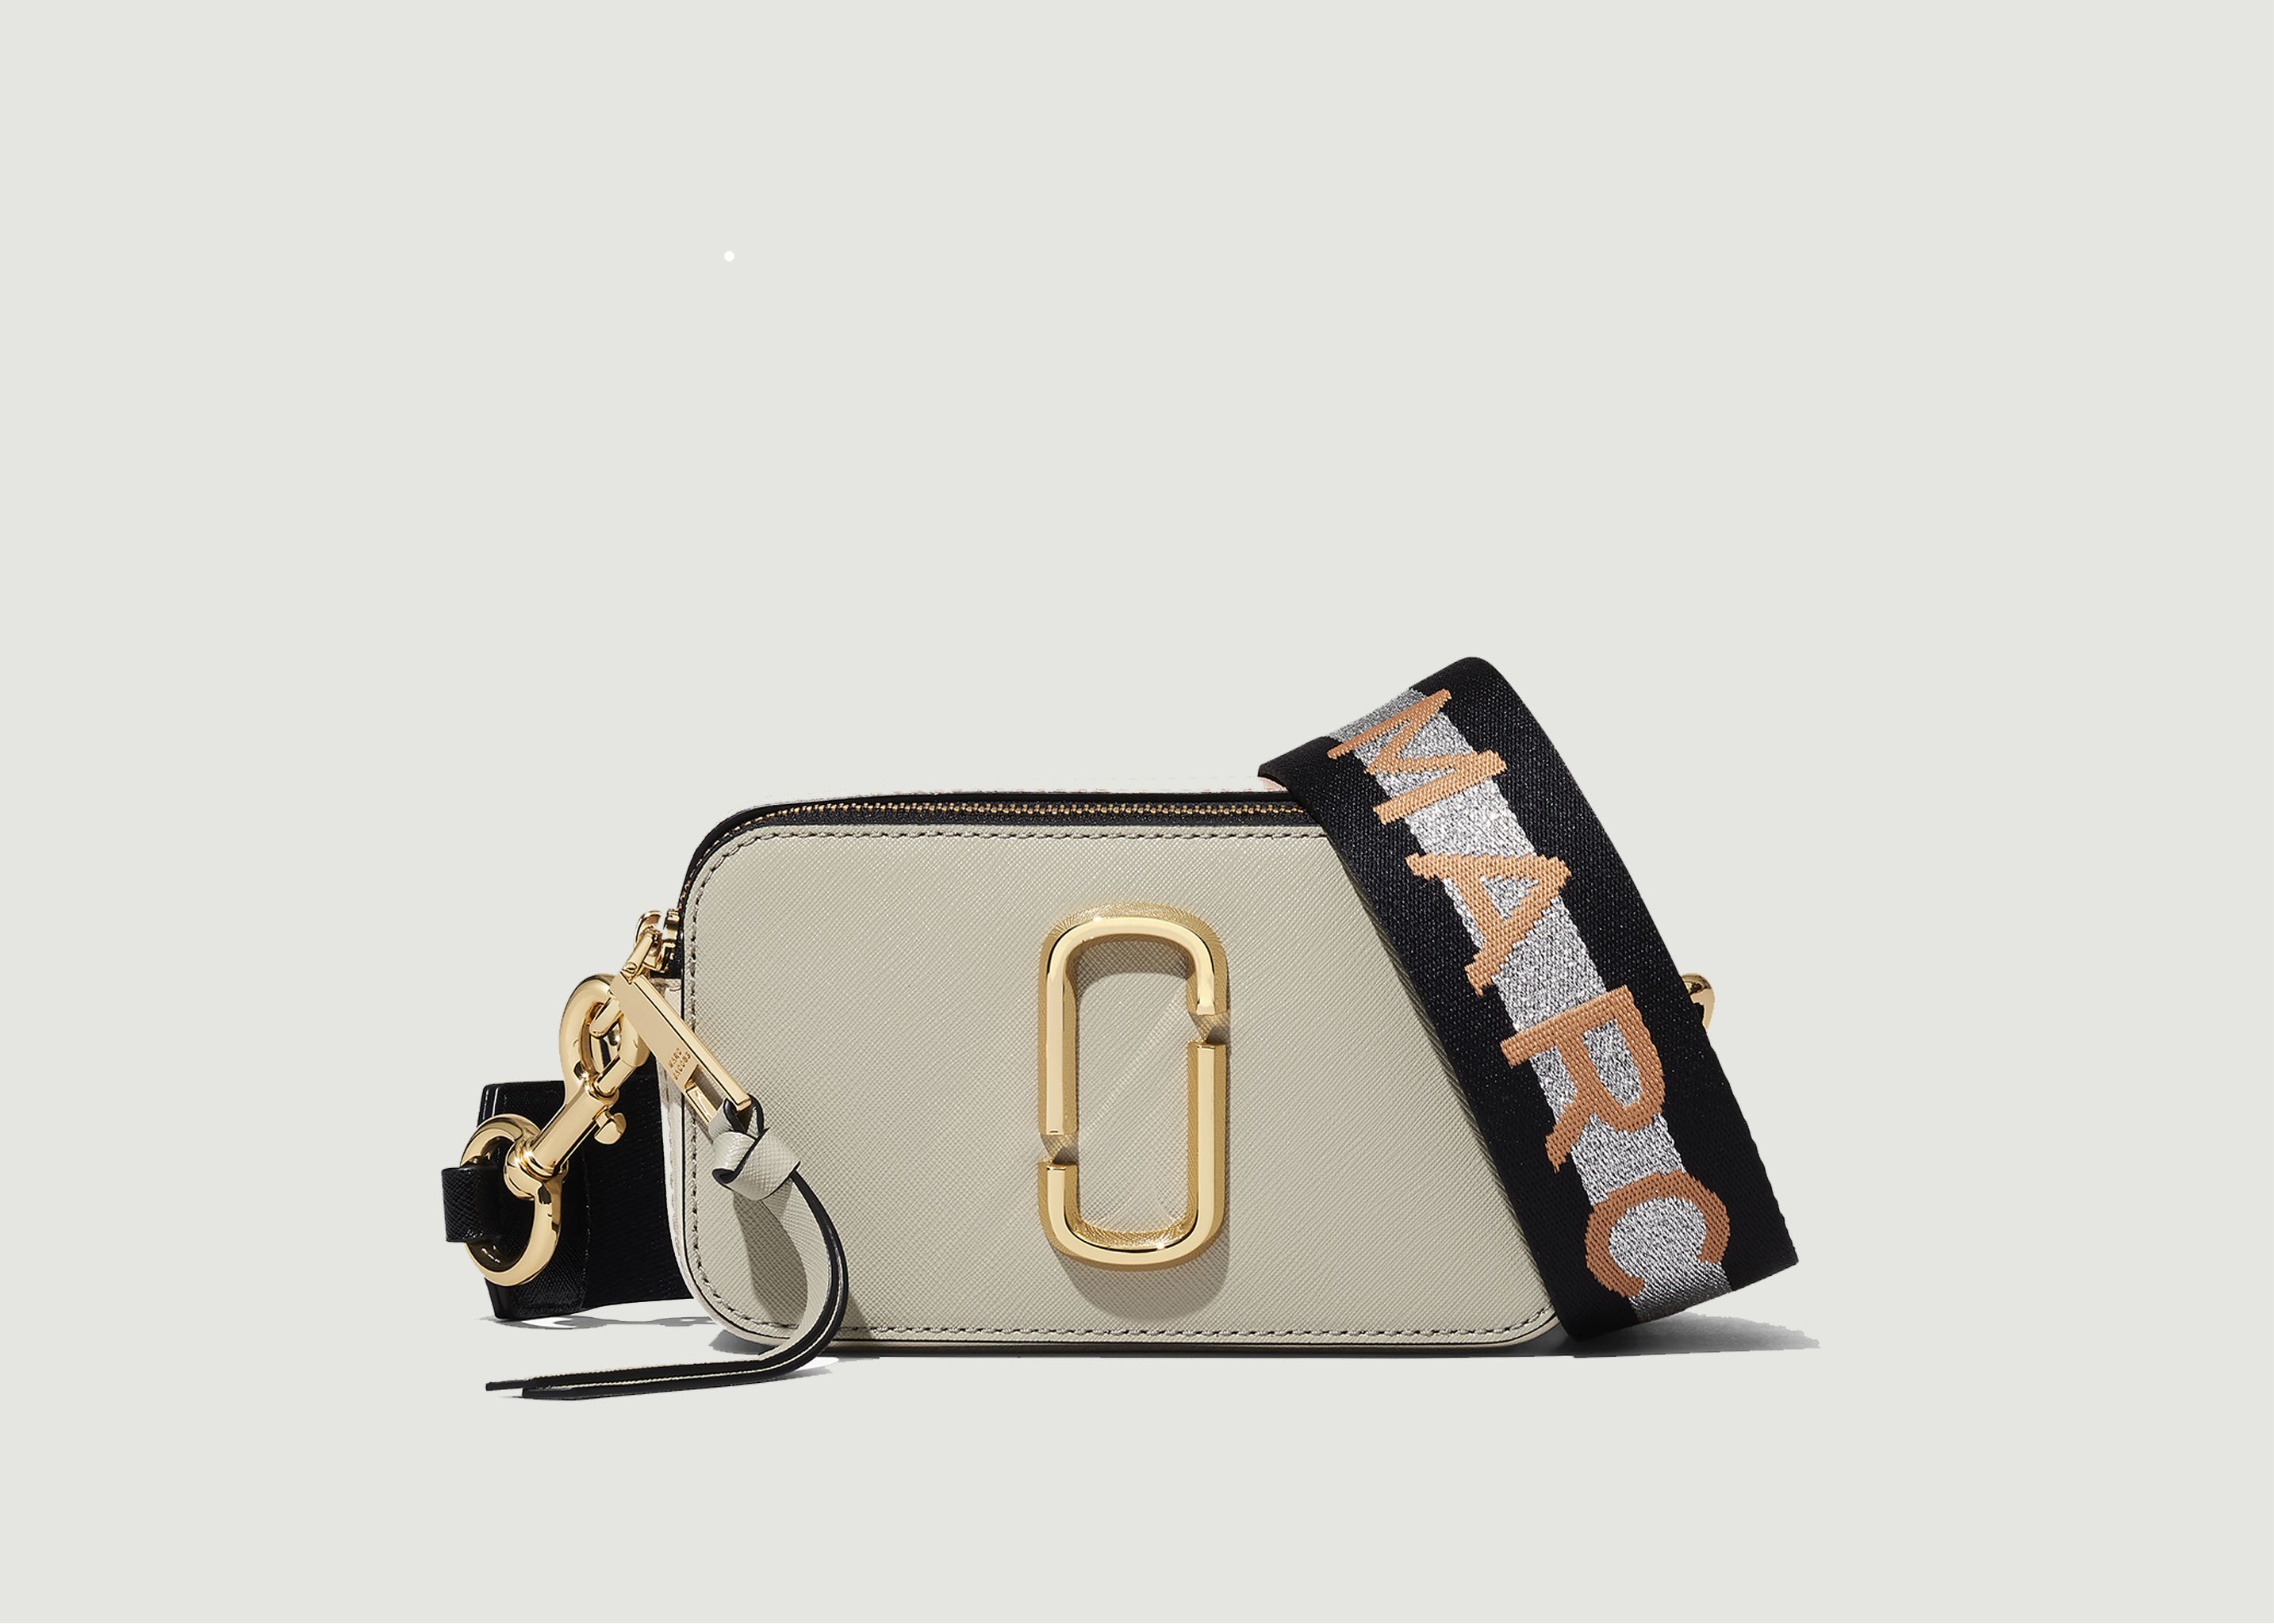 The Snapshot leather bag Grey Marc Jacobs